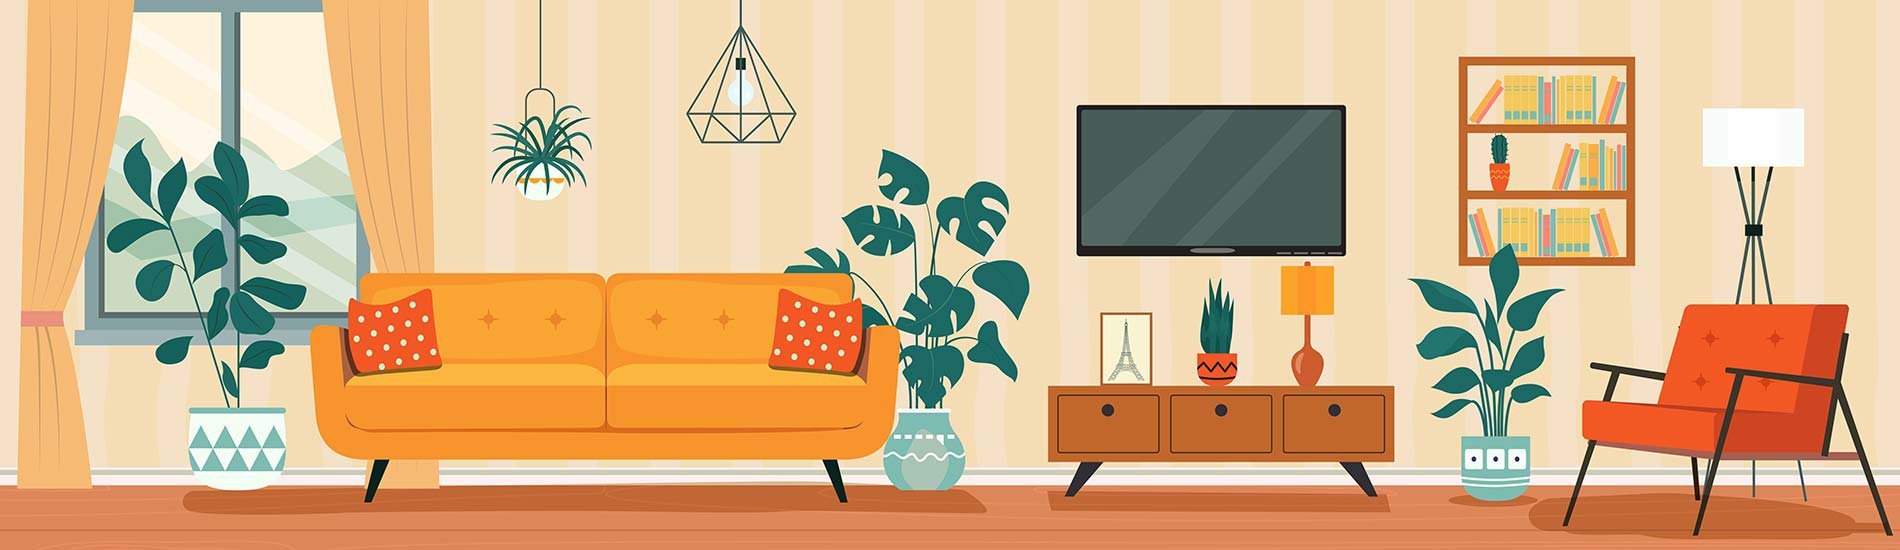 Illustration of living room contents